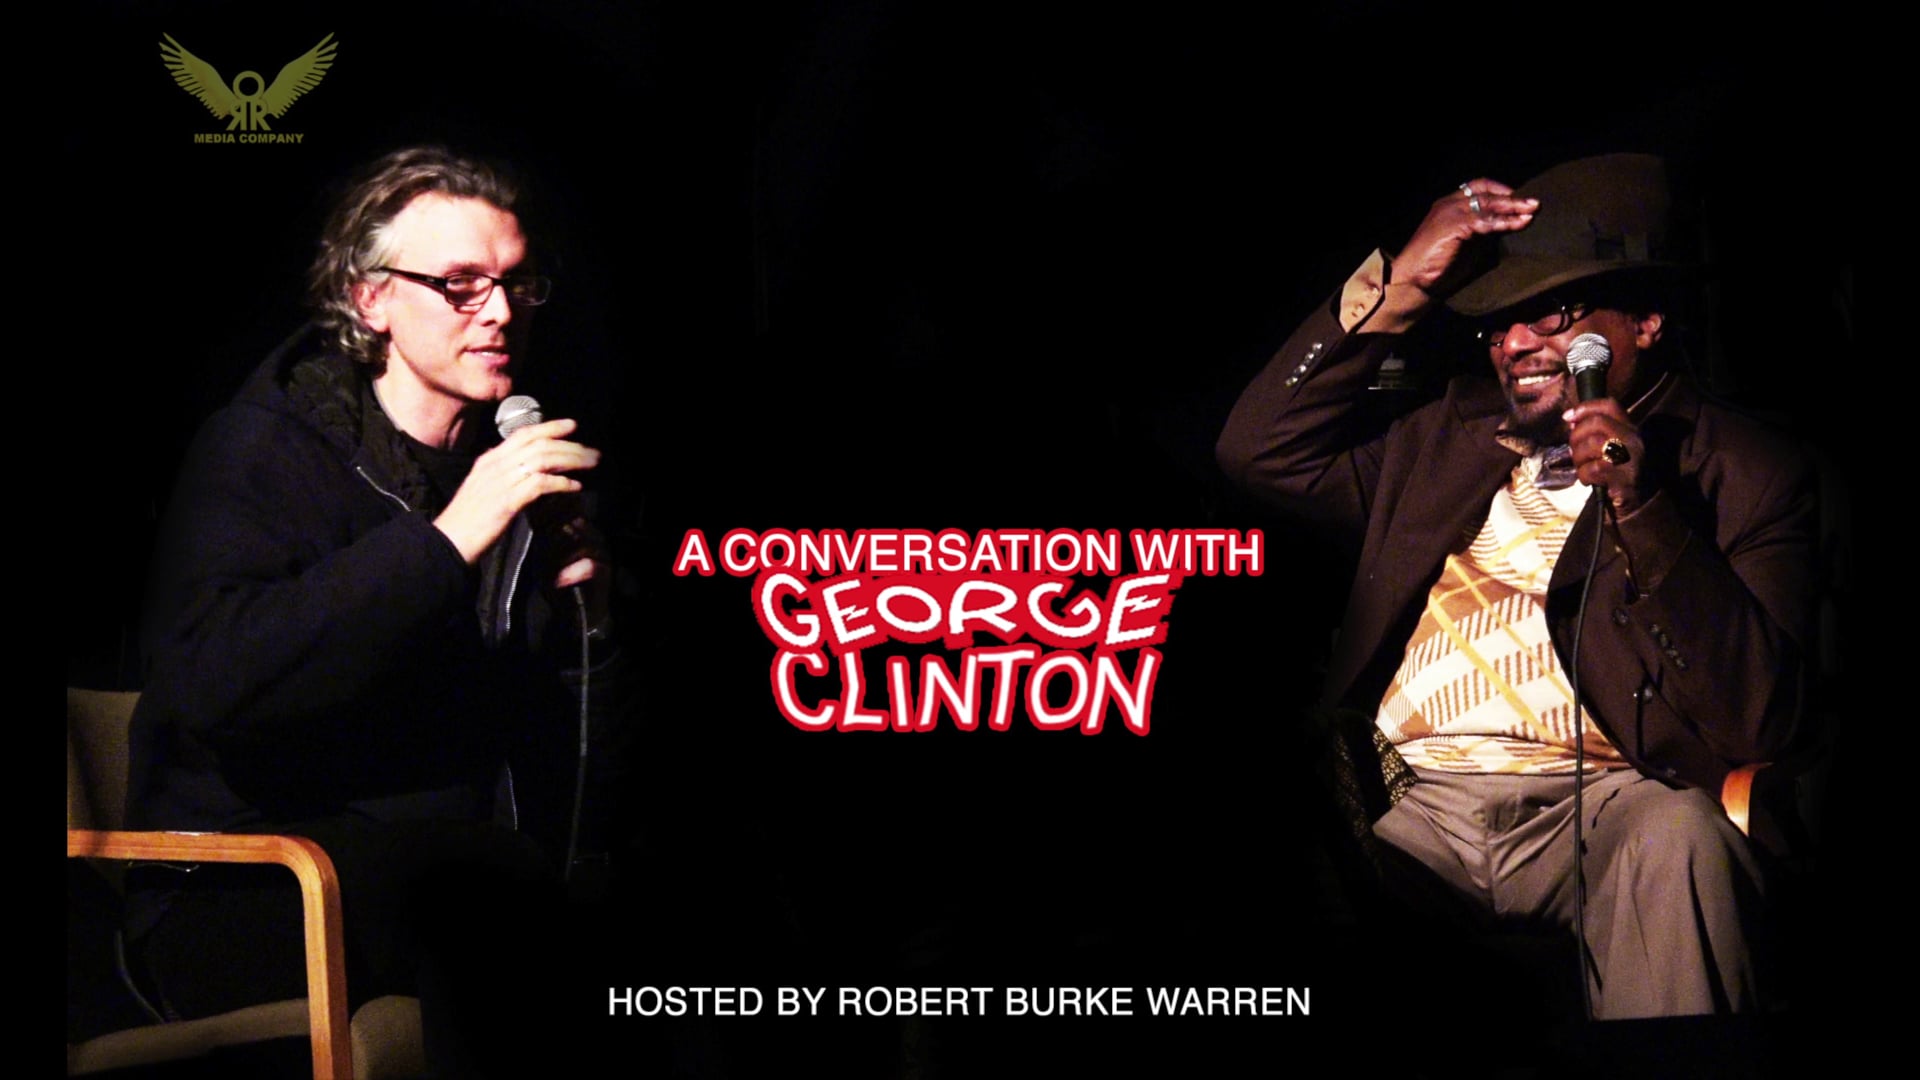 A Conversation with George Clinton